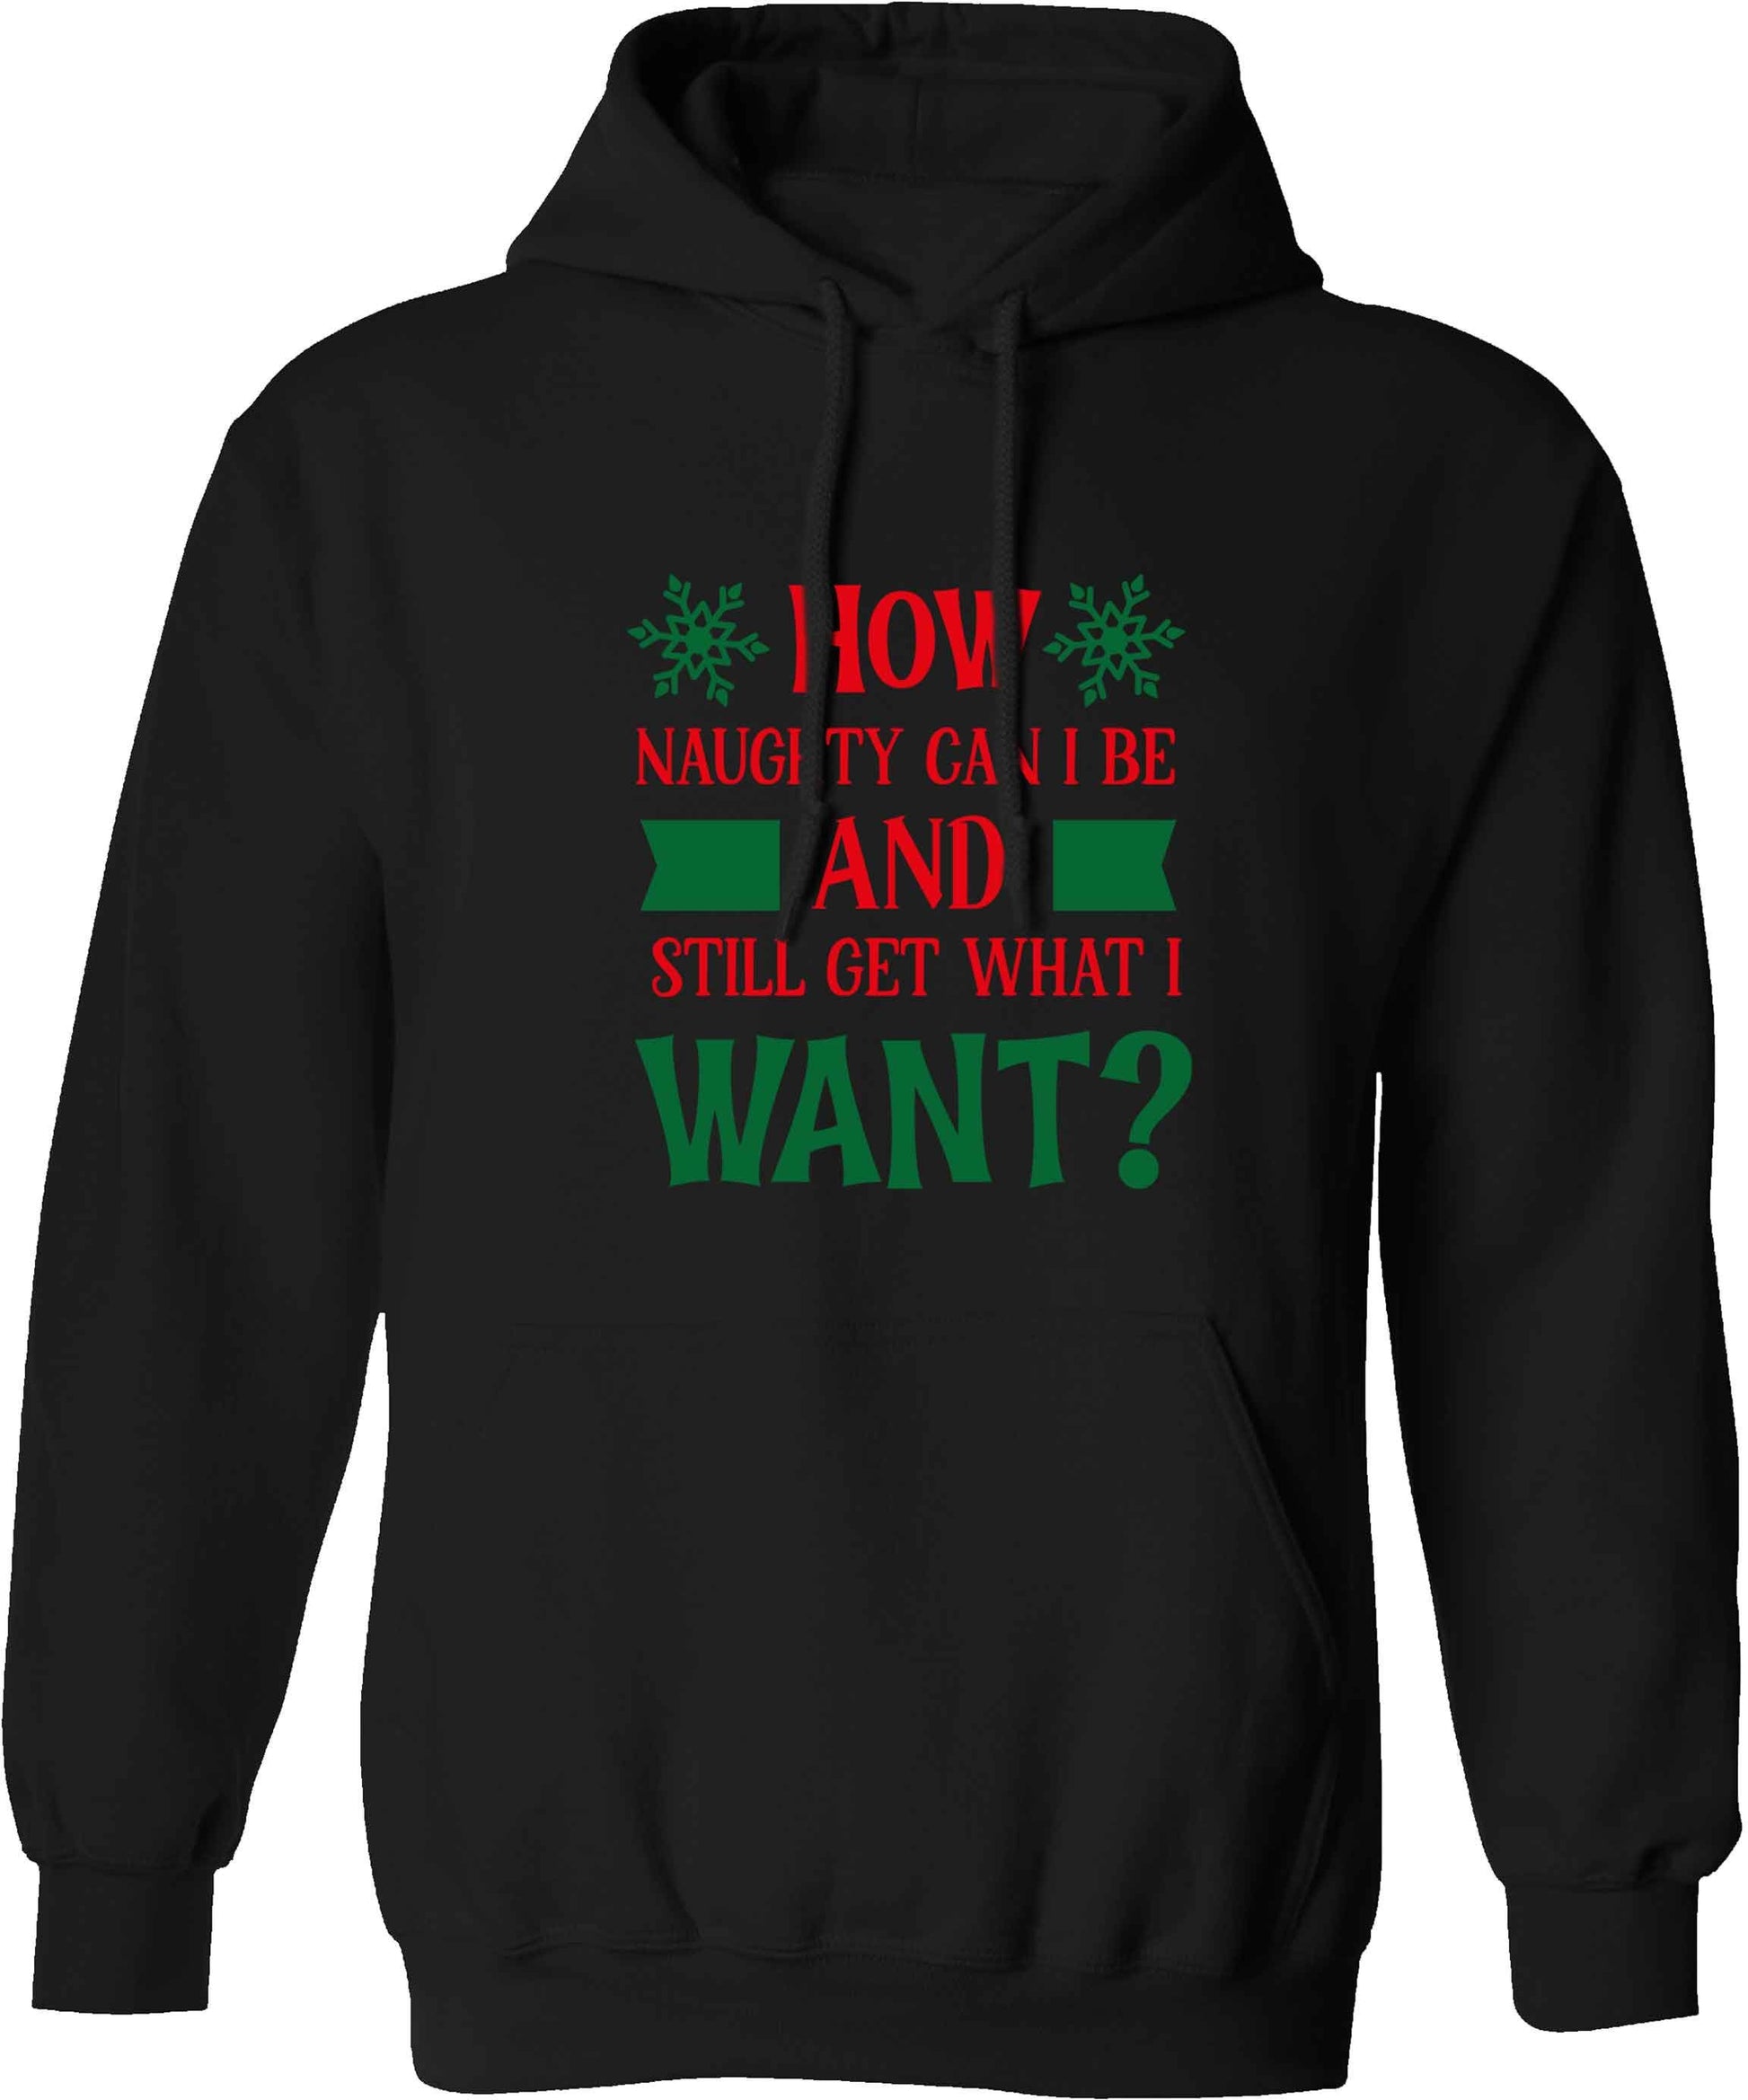 How naughty can I be and still get what I want? adults unisex black hoodie 2XL